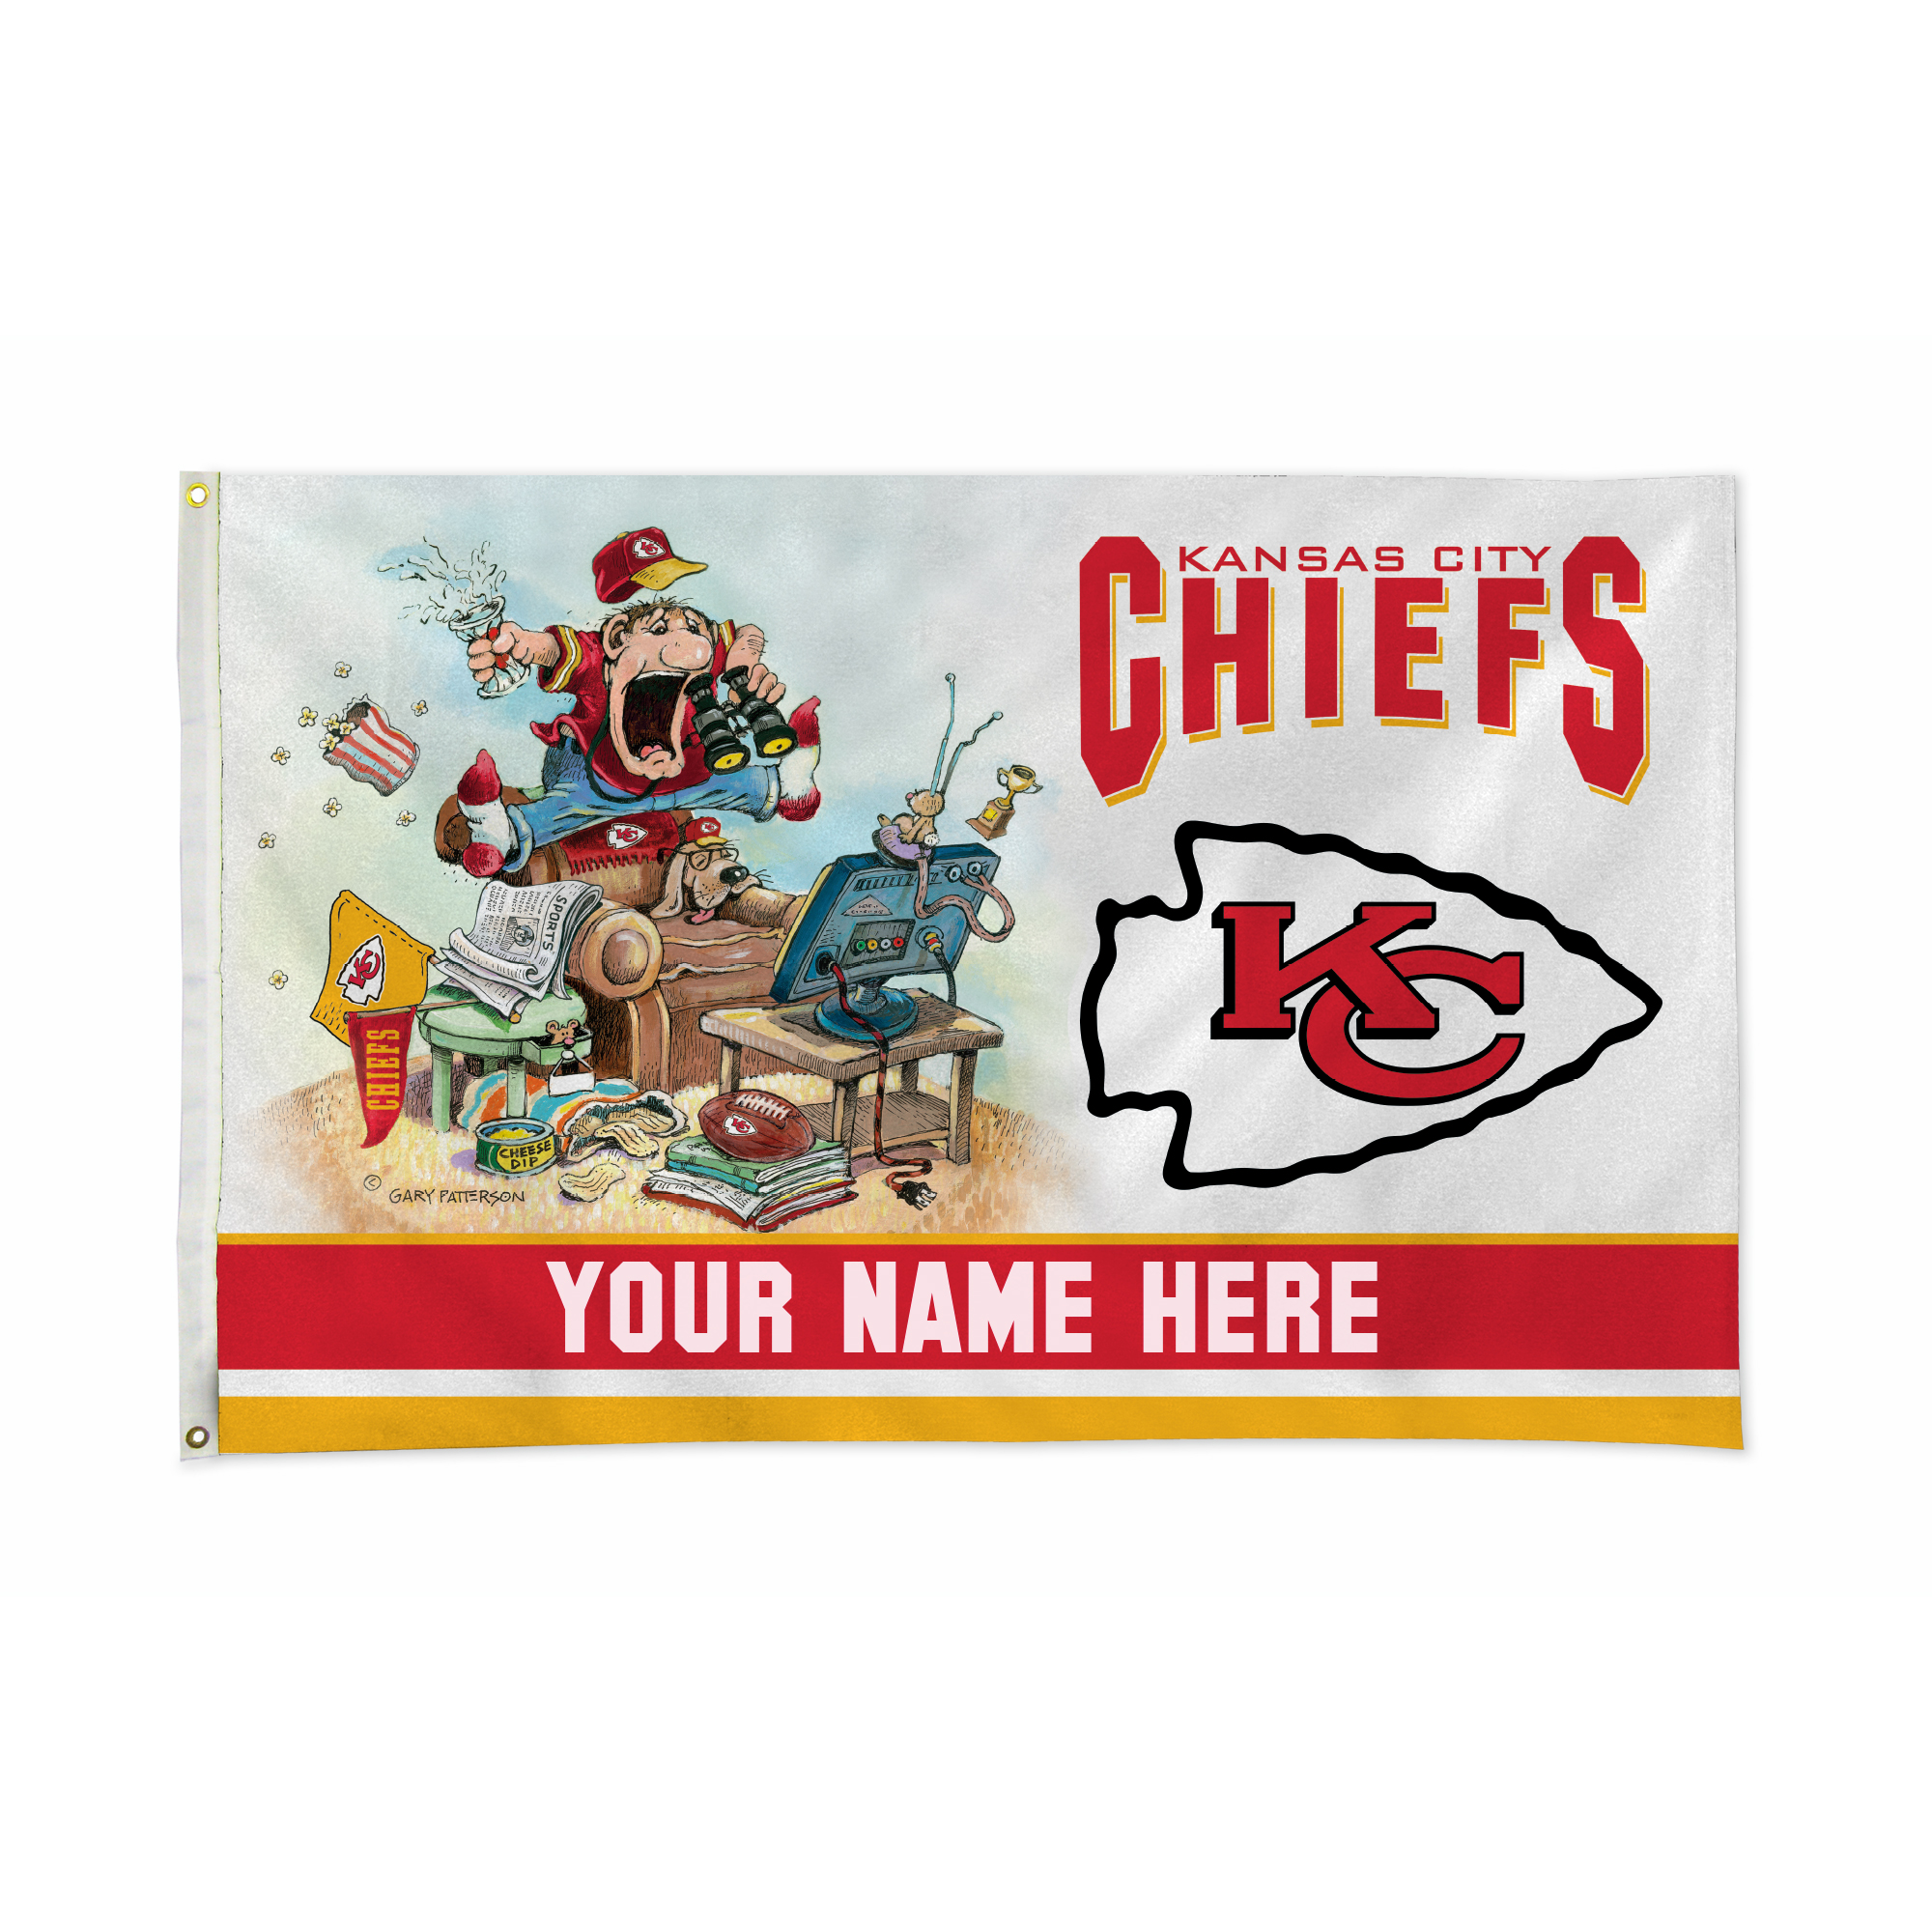 Rico Industries NFL Football Kansas City Chiefs "The Fan" by Gary Patterson Personalized 3' x 5' Banner Flag